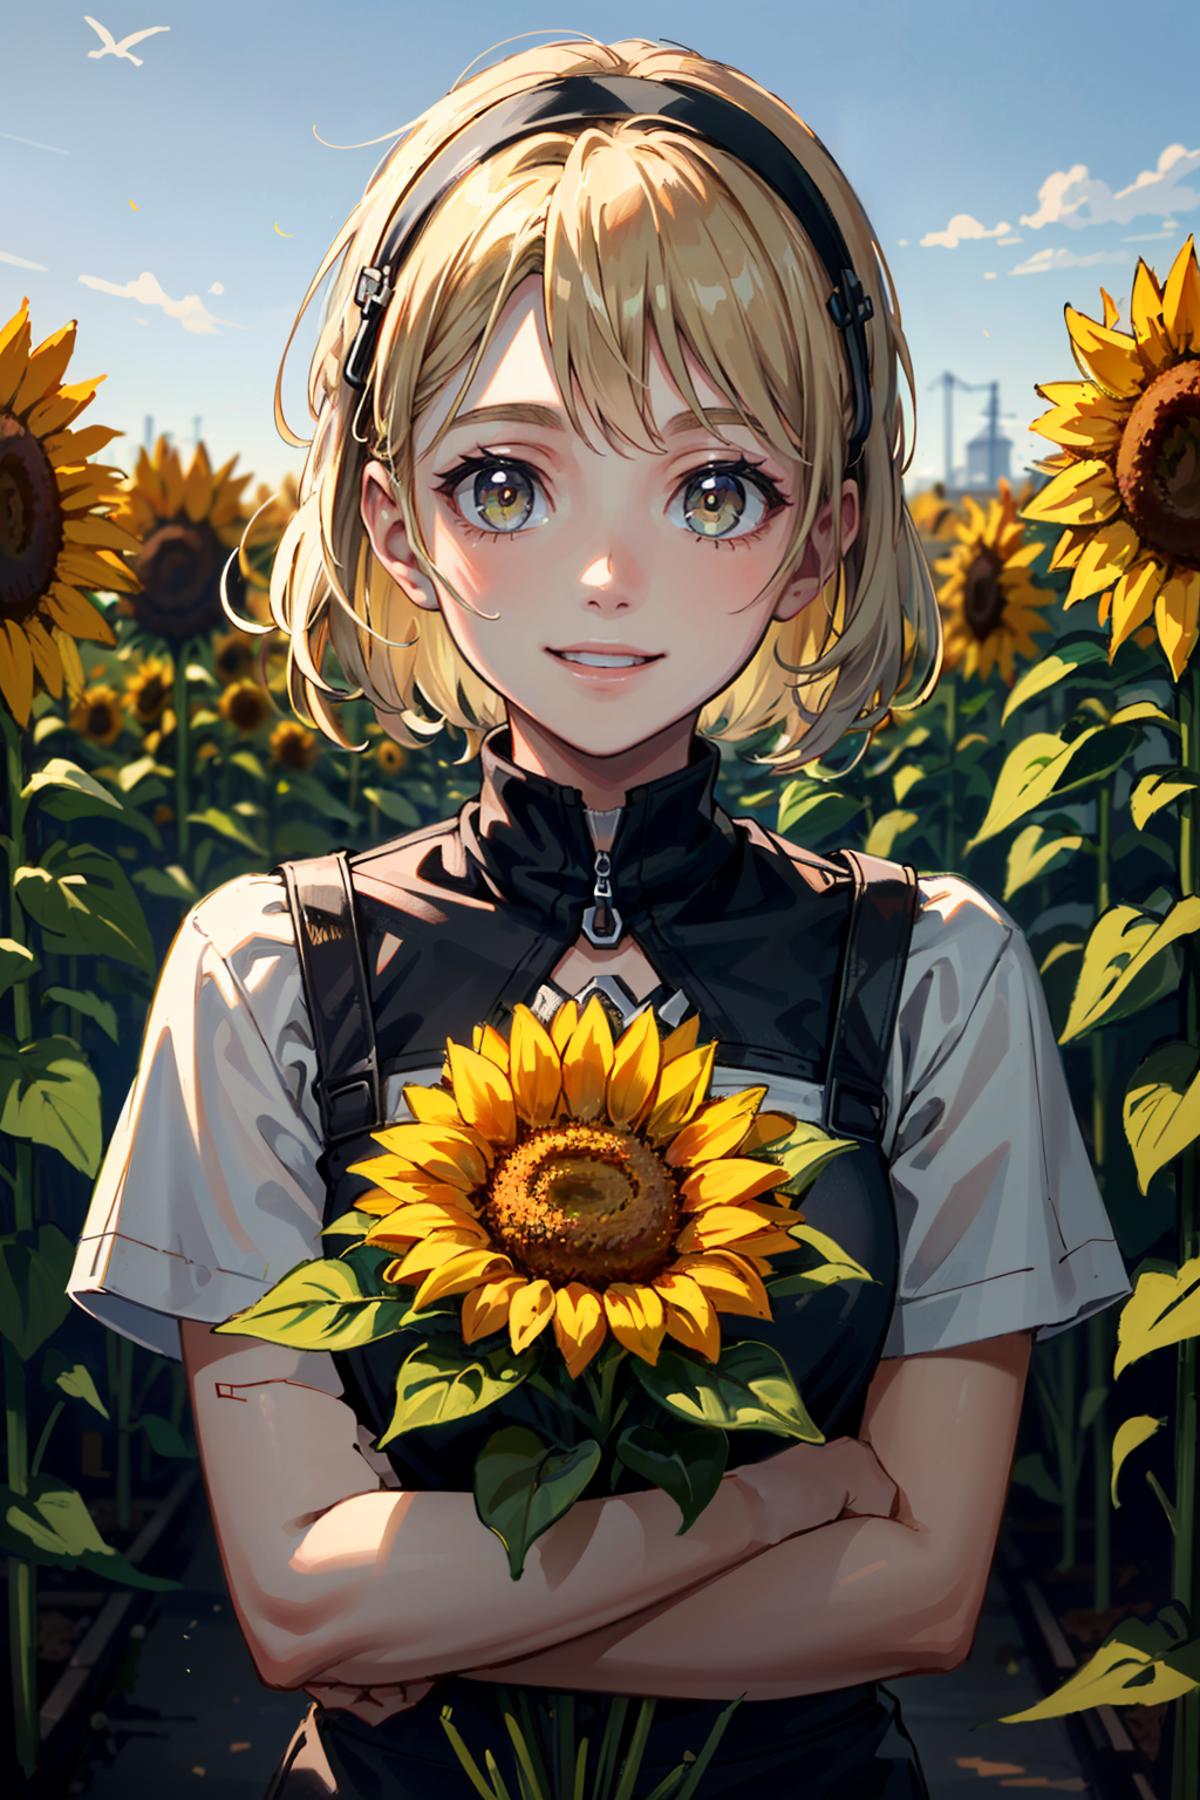 Anime girl with sunflowers in background watering a watering can 